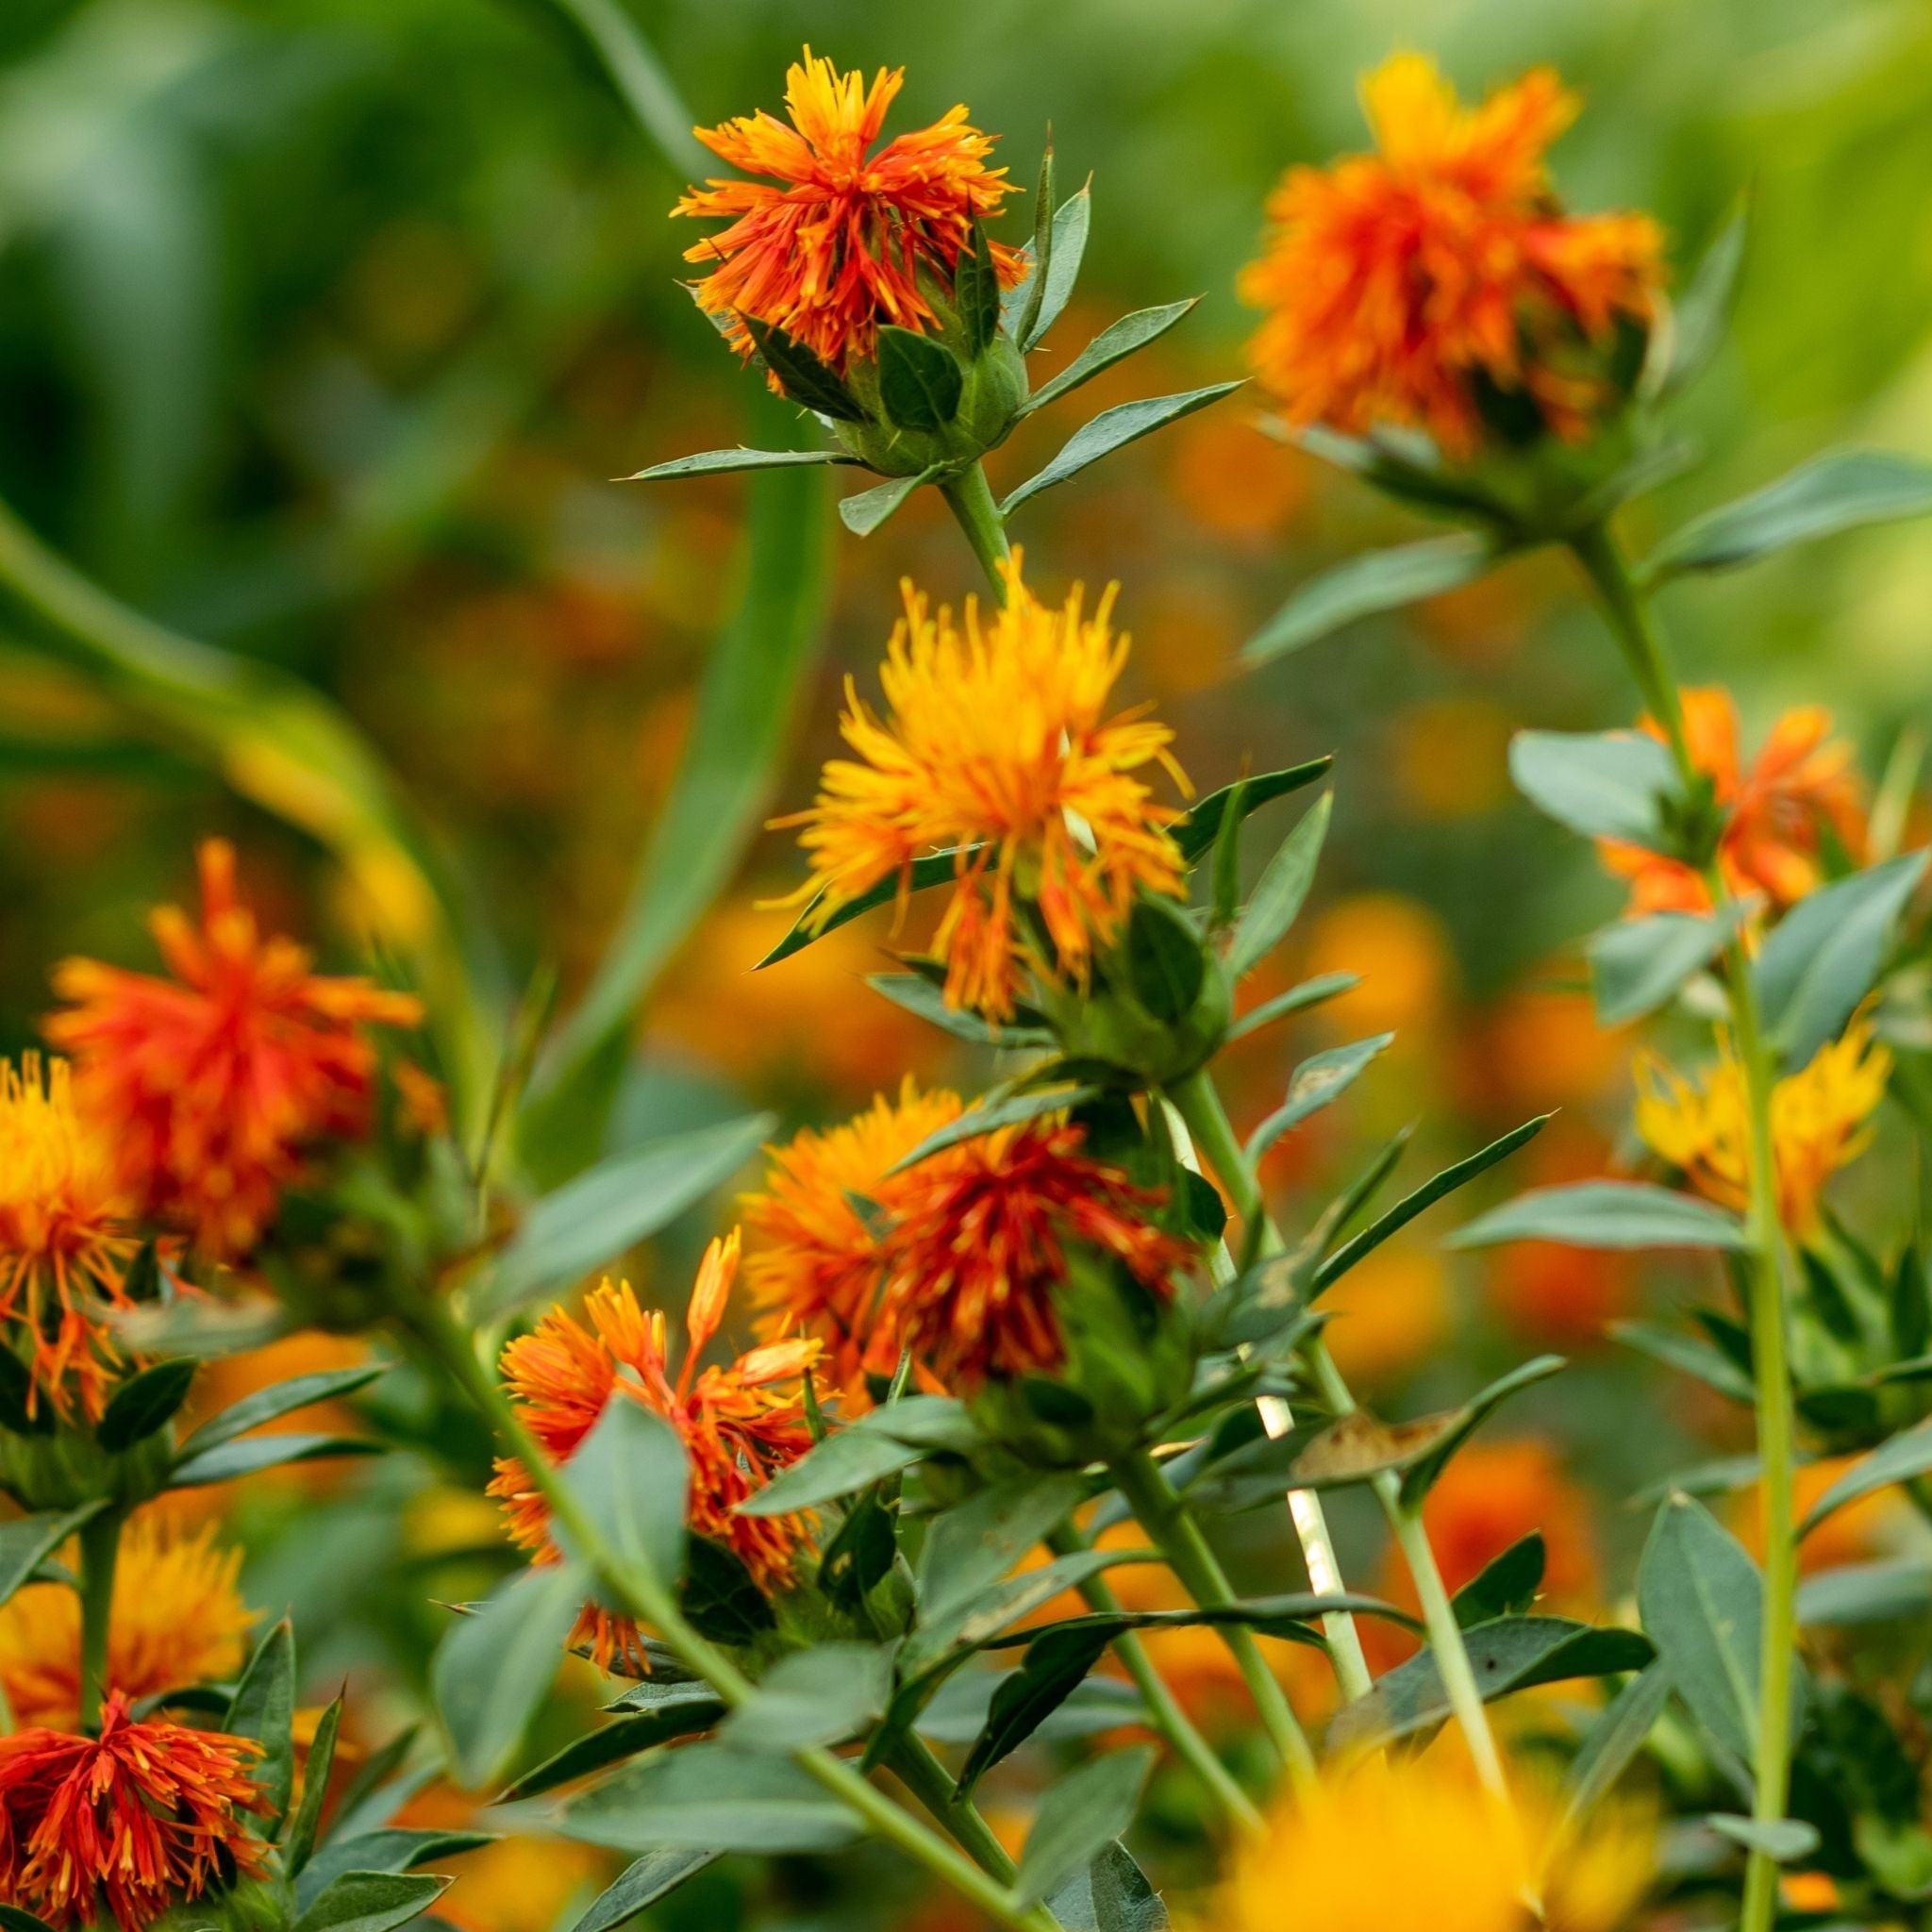 Safflower is more than just a pretty plant